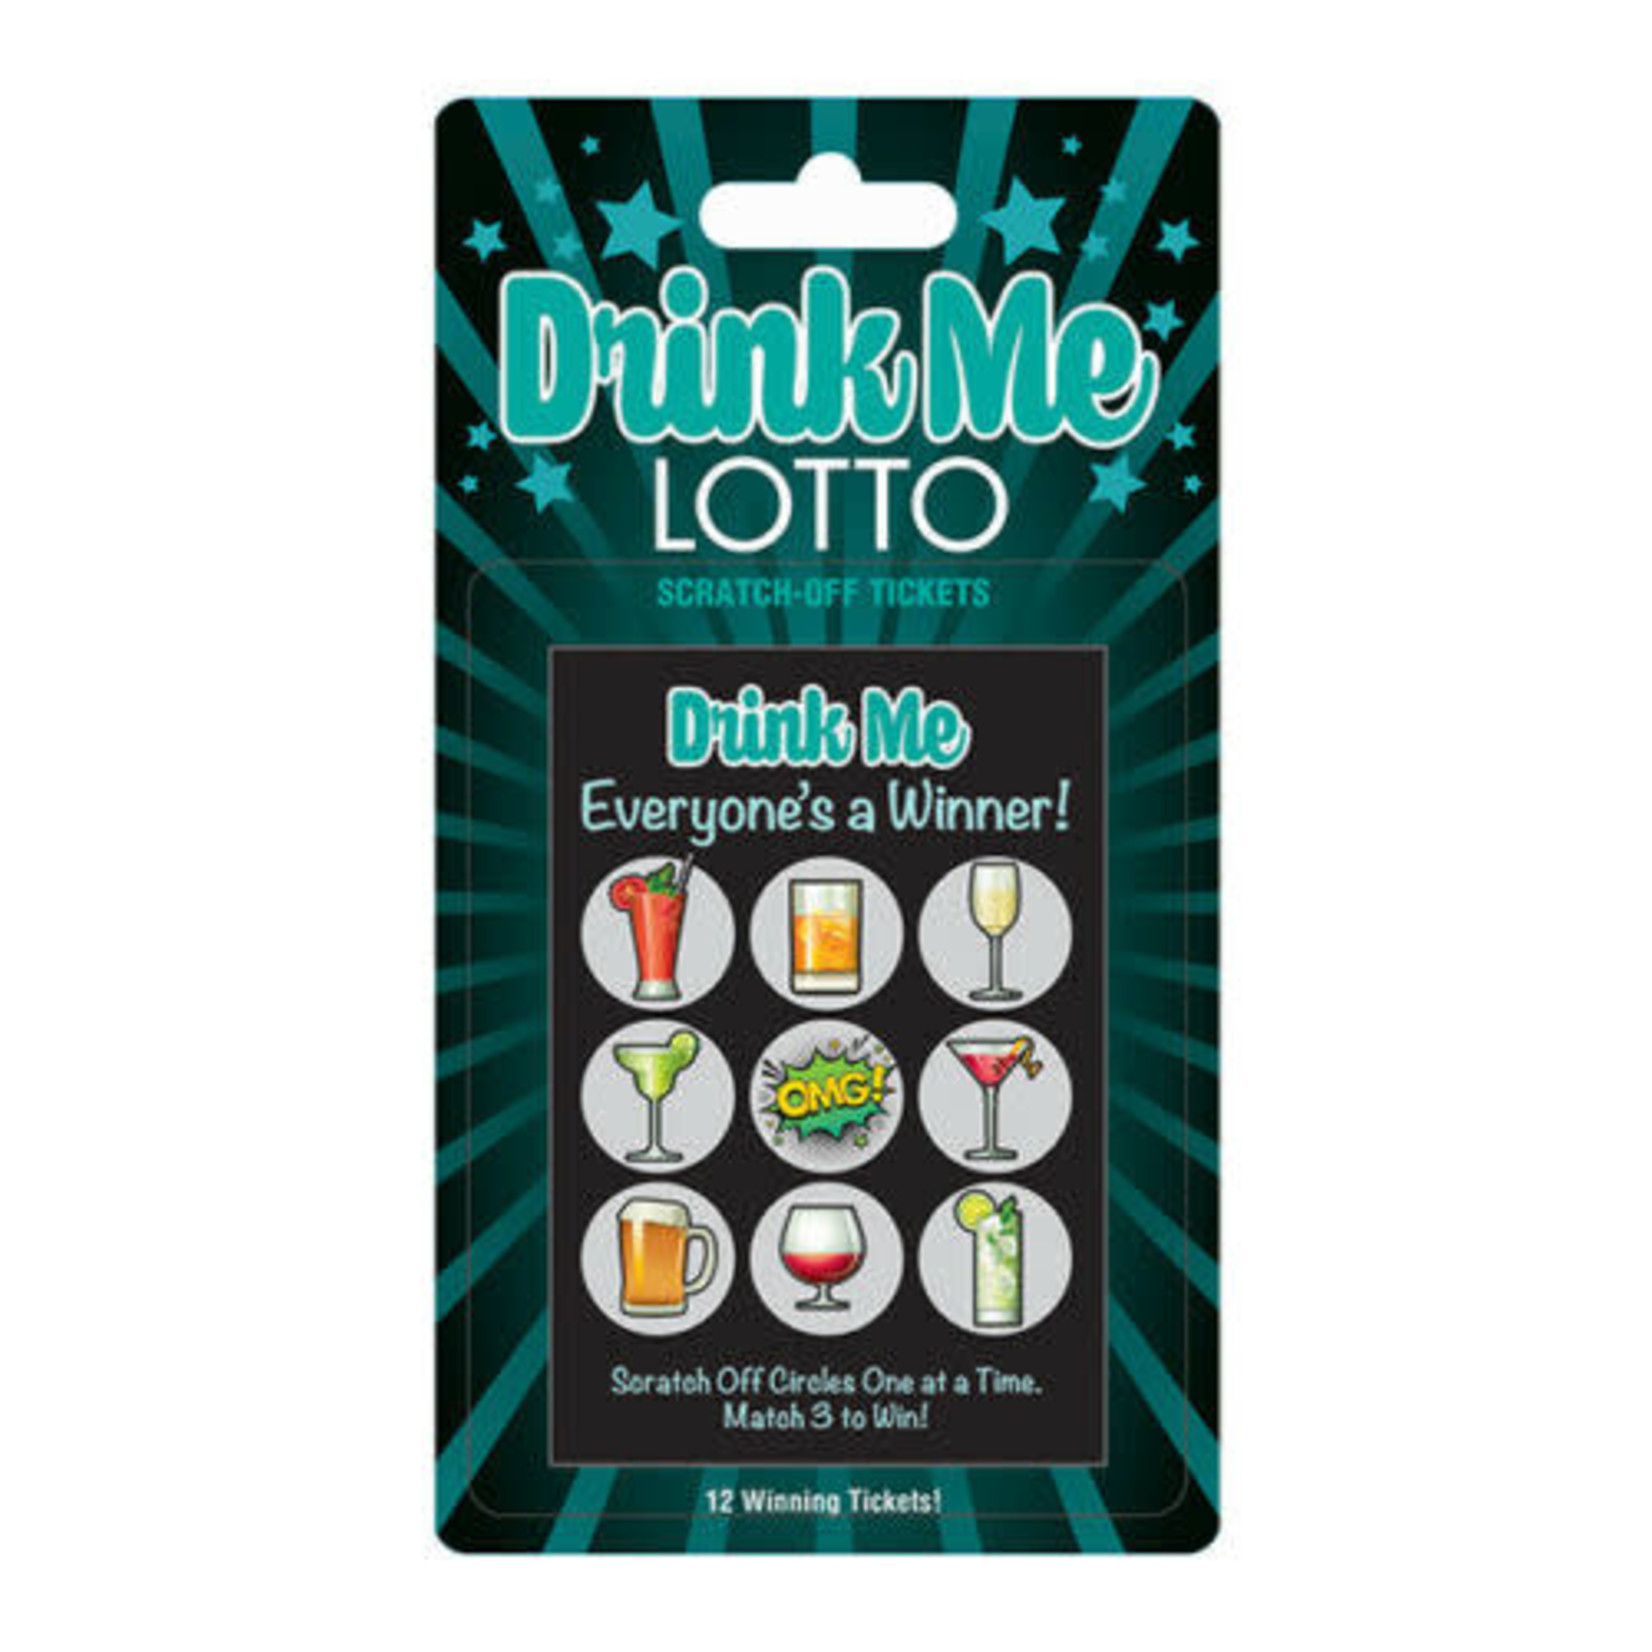 DRINK ME LOTTO SCRATCH CARD